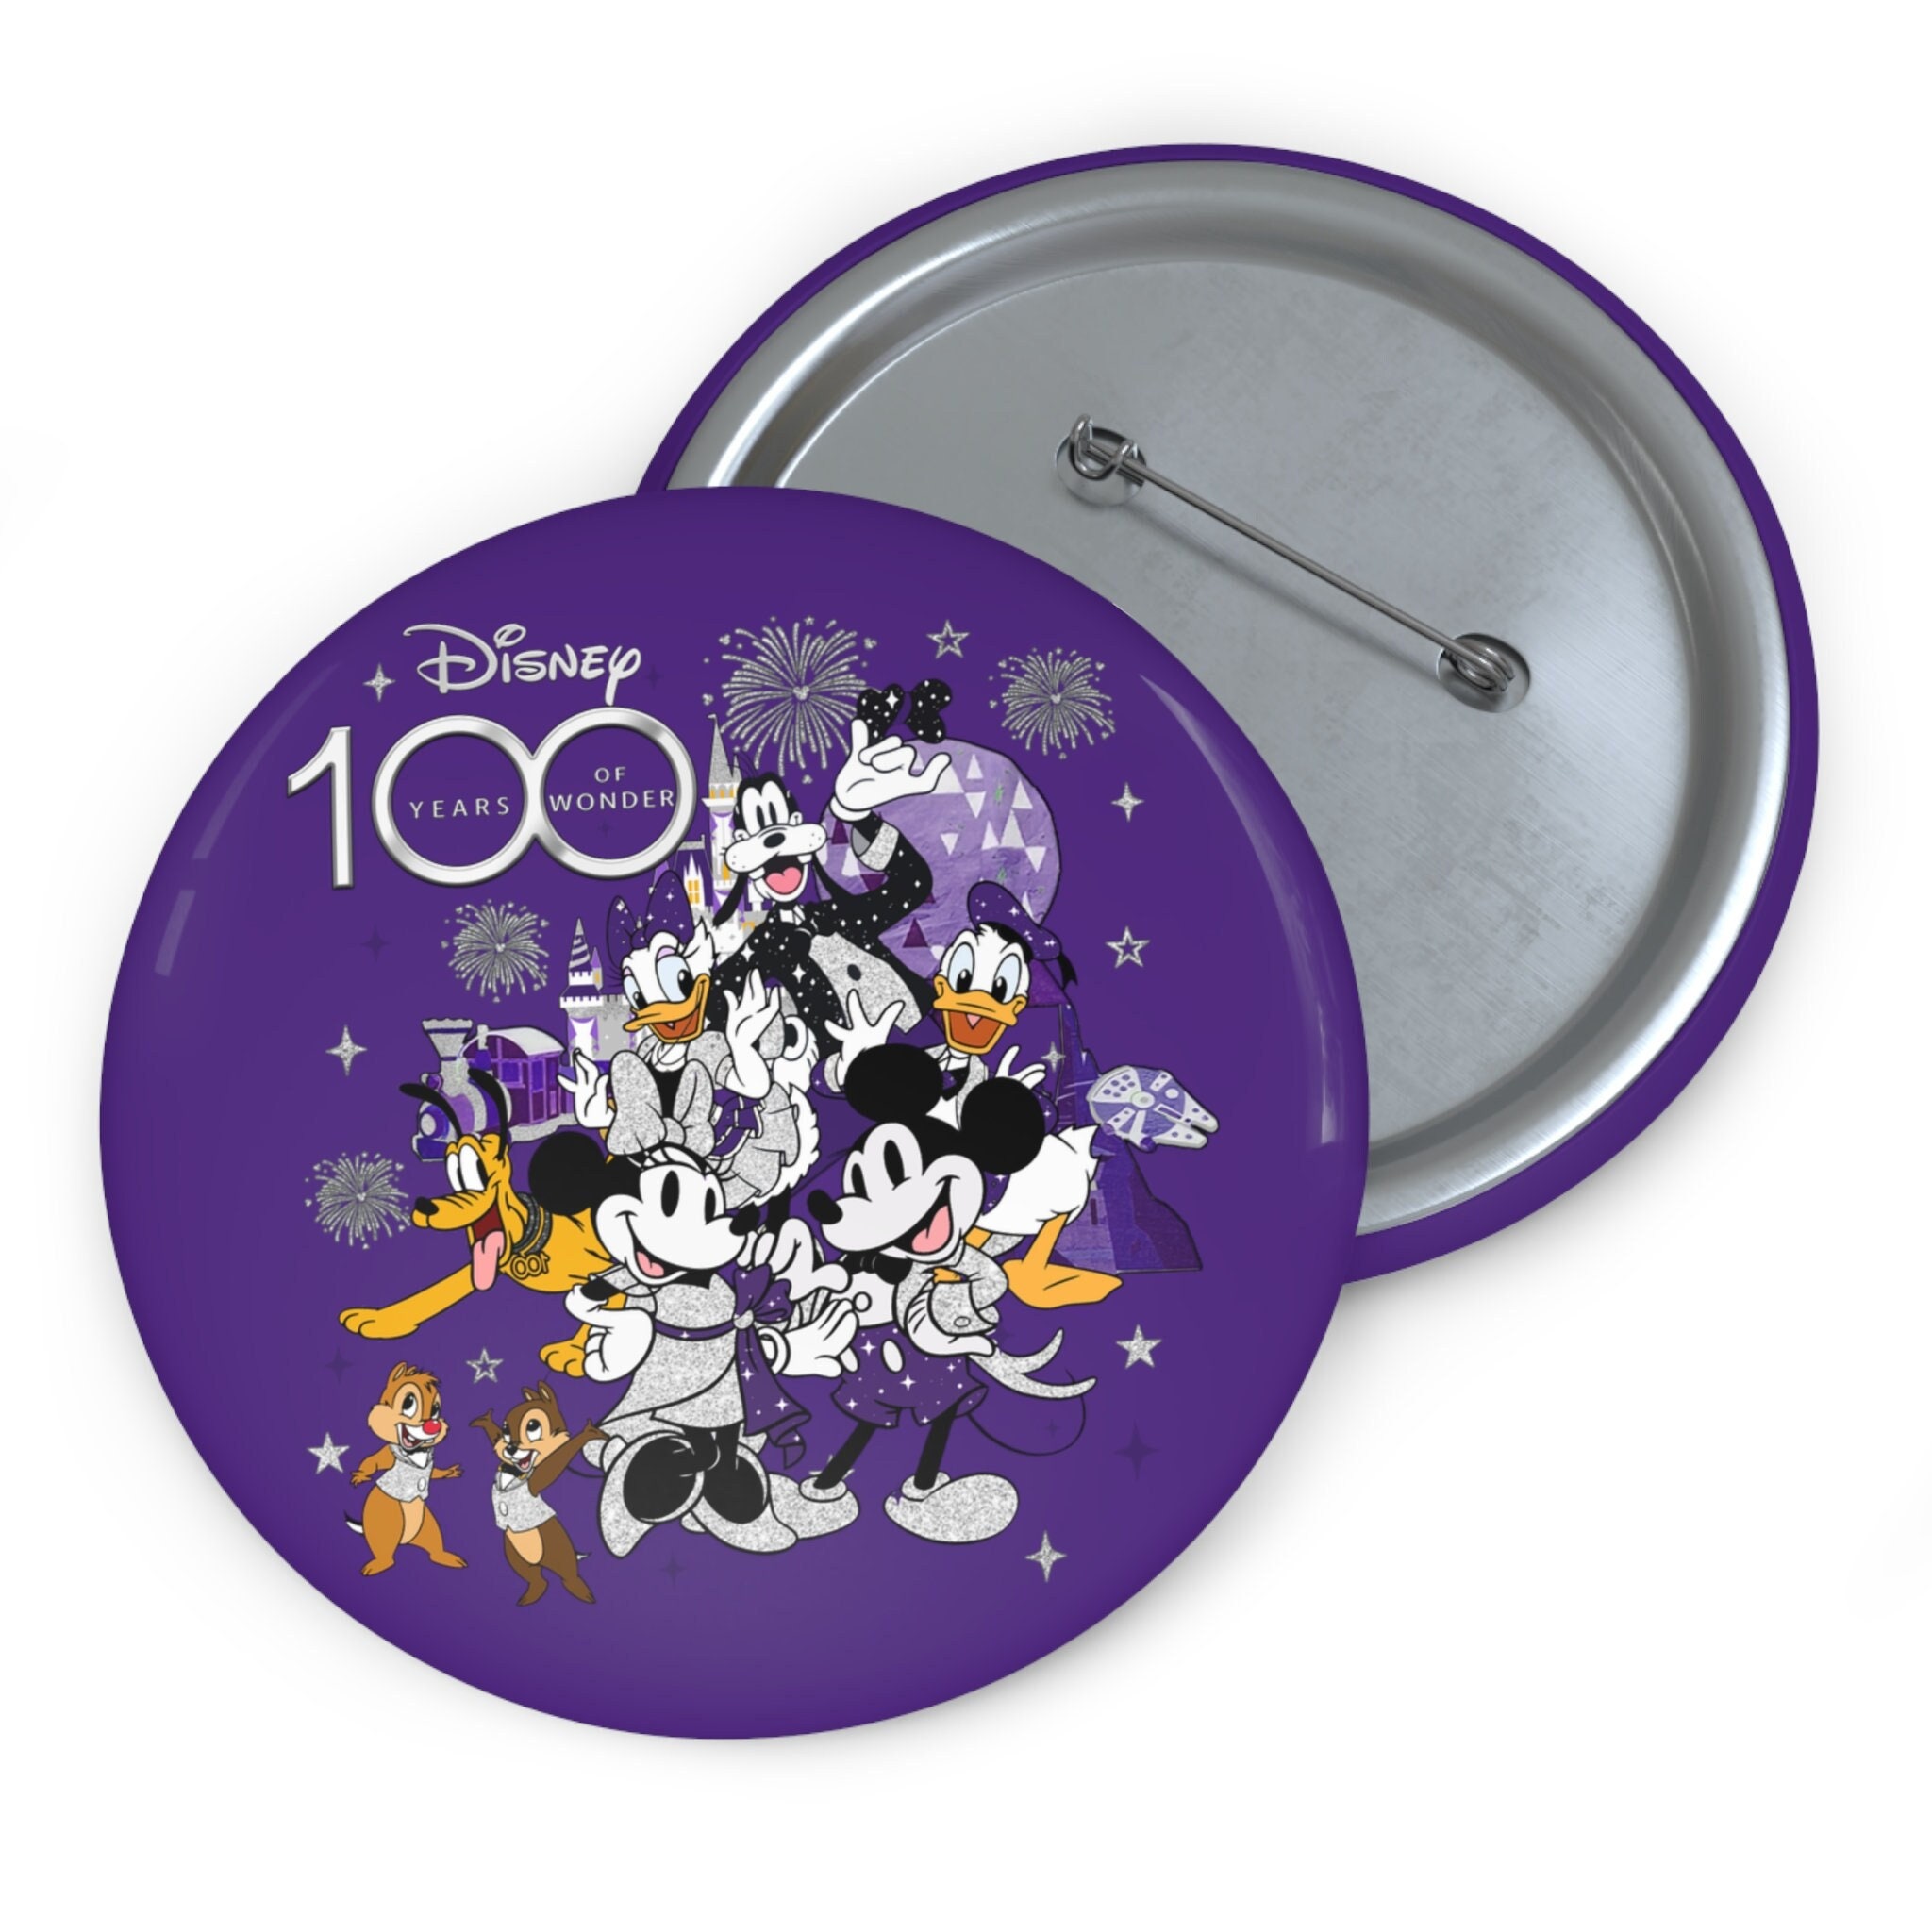 Disneyland Buttons, Disney 100 Years of Wonder Pin, Mickey and Friends 100th Pin Button